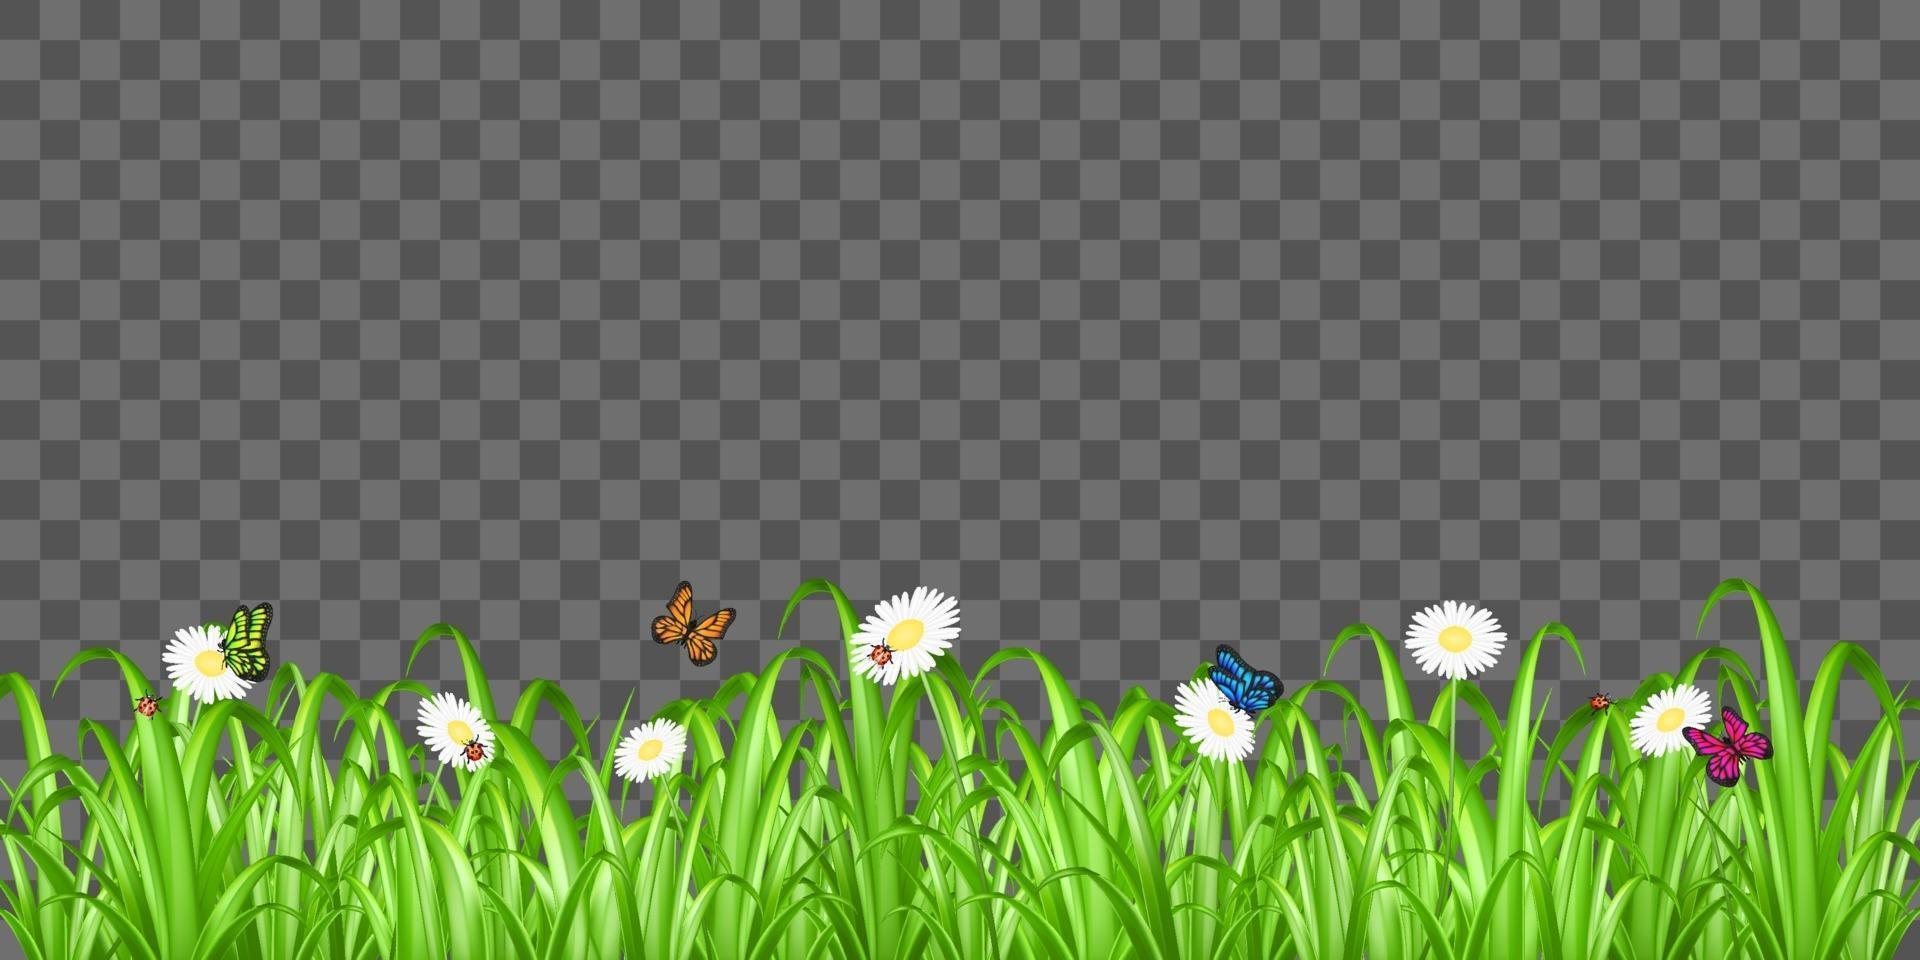 grass, flower and butterfly on background vector